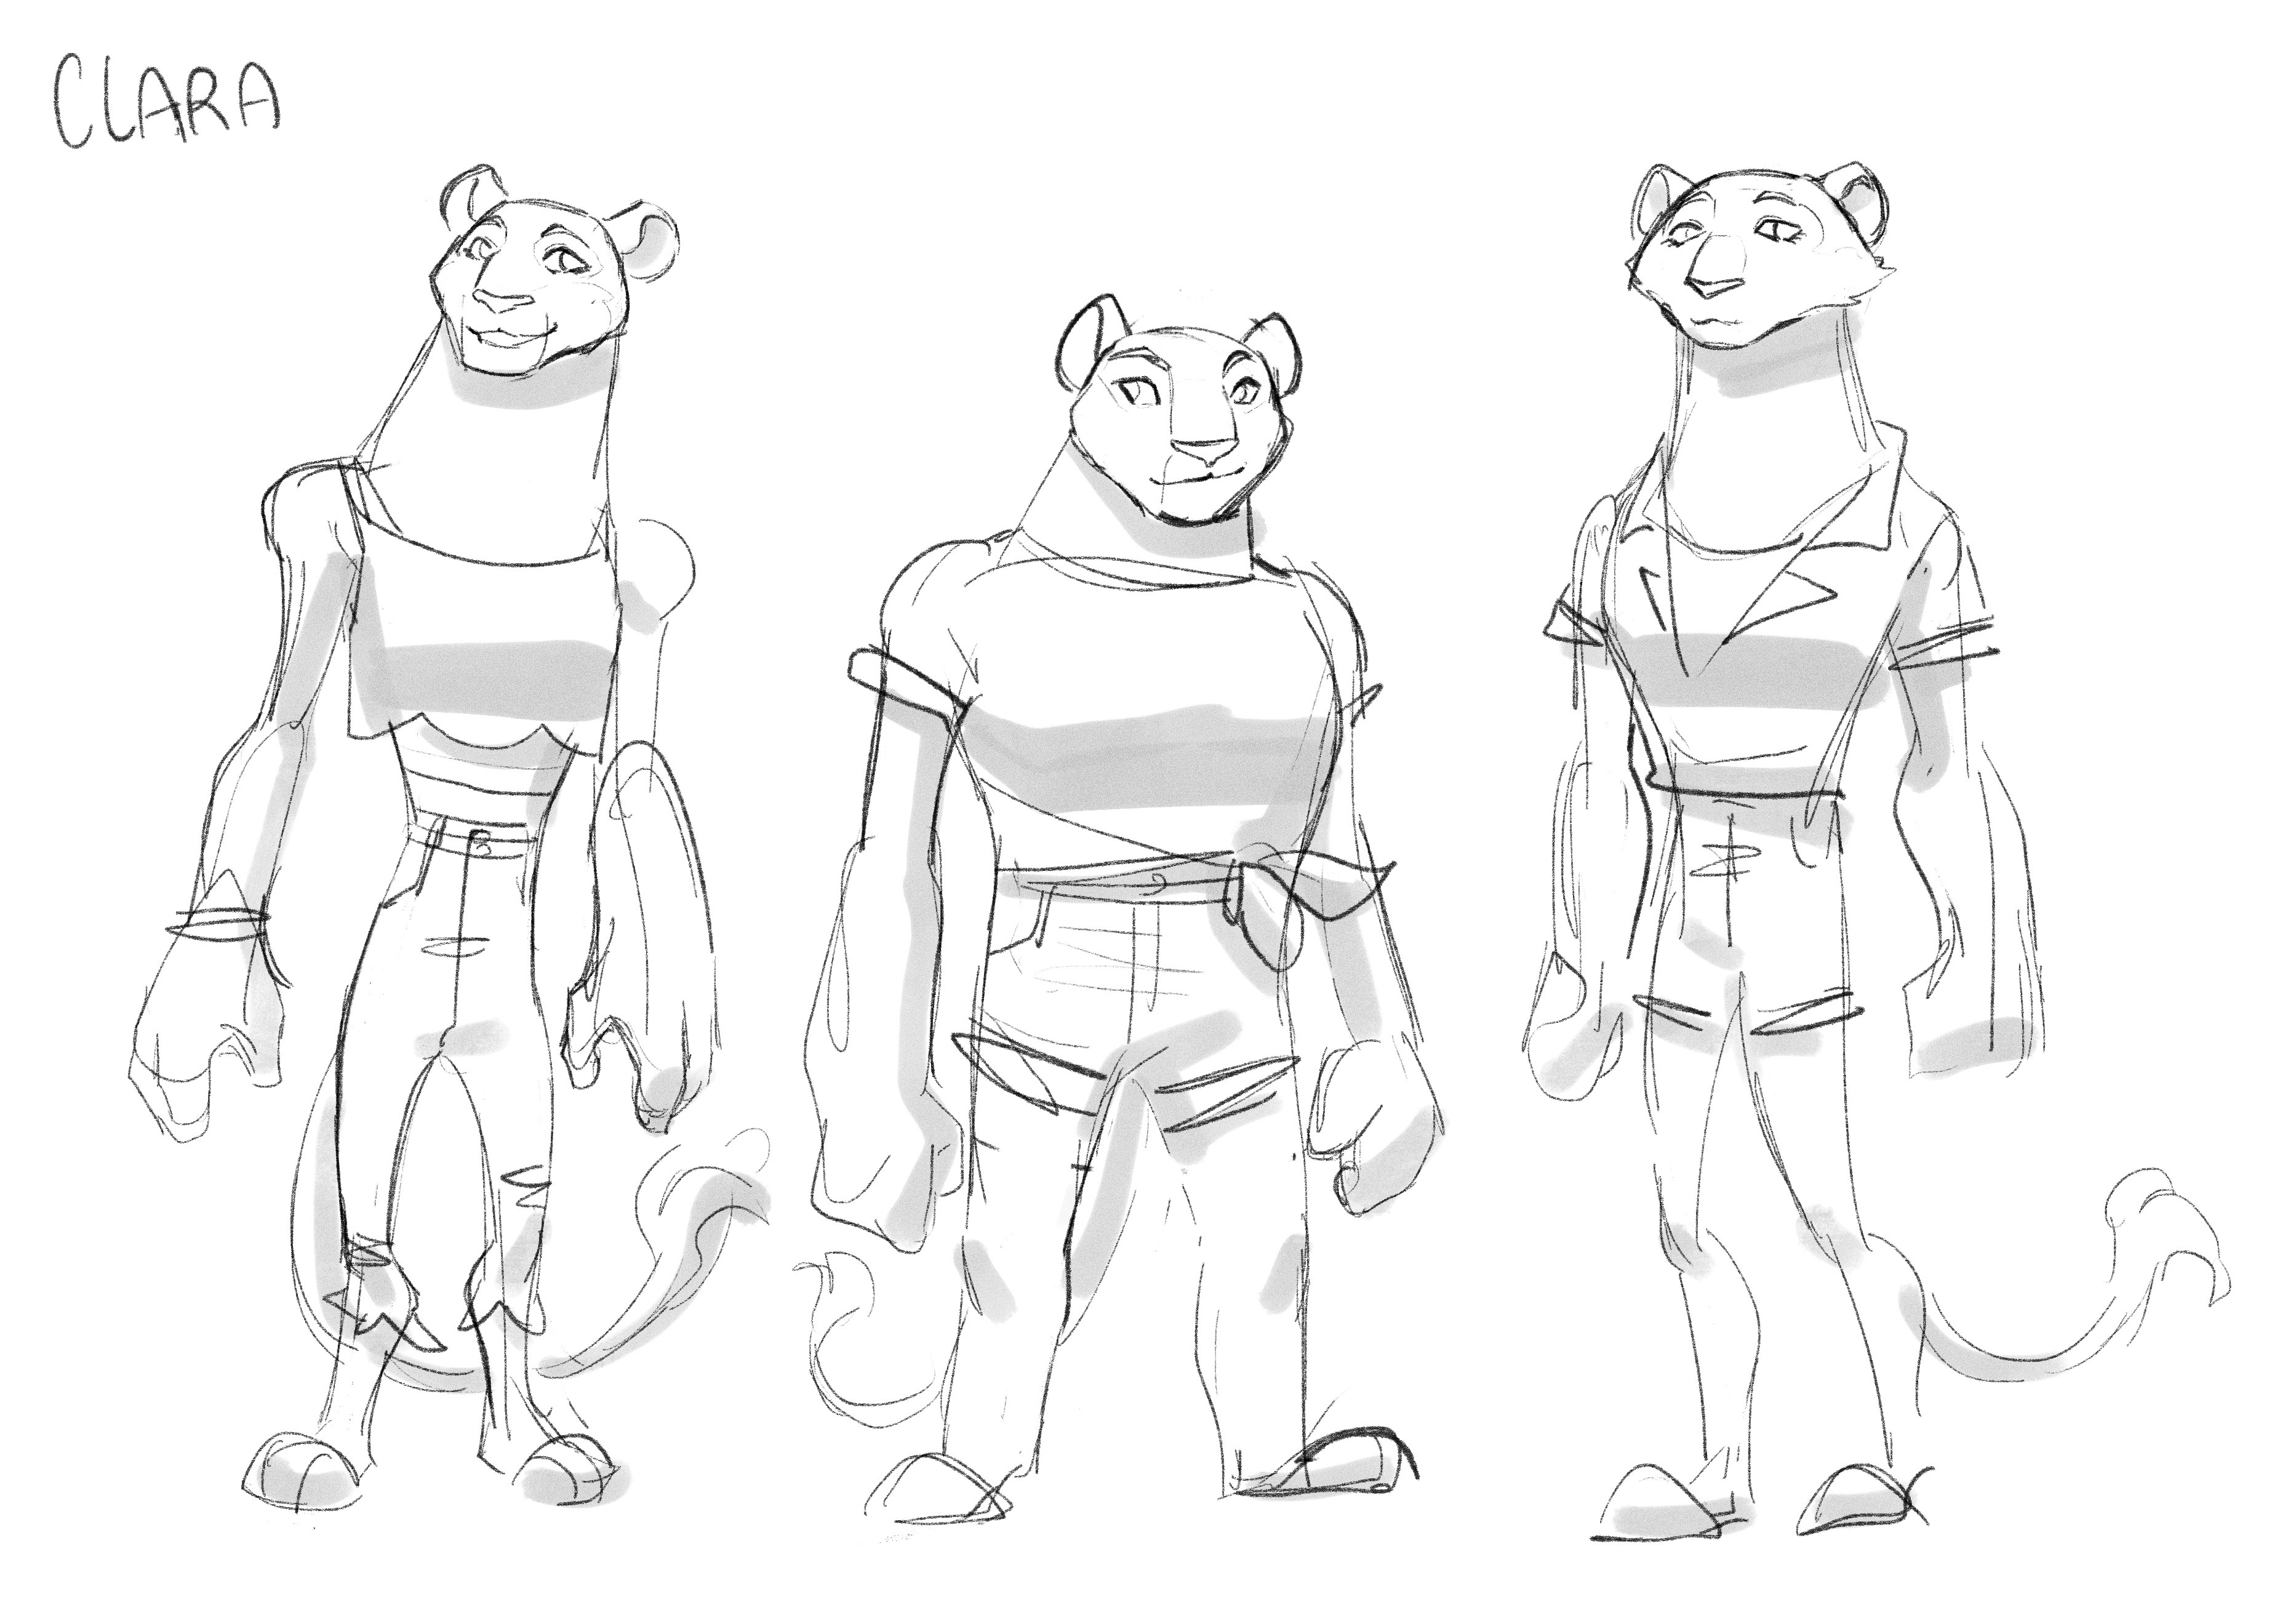 I knew one of the lions would have a mane, but I still wanted people to know they are twins so that’s why I tried the same body shapes for both.